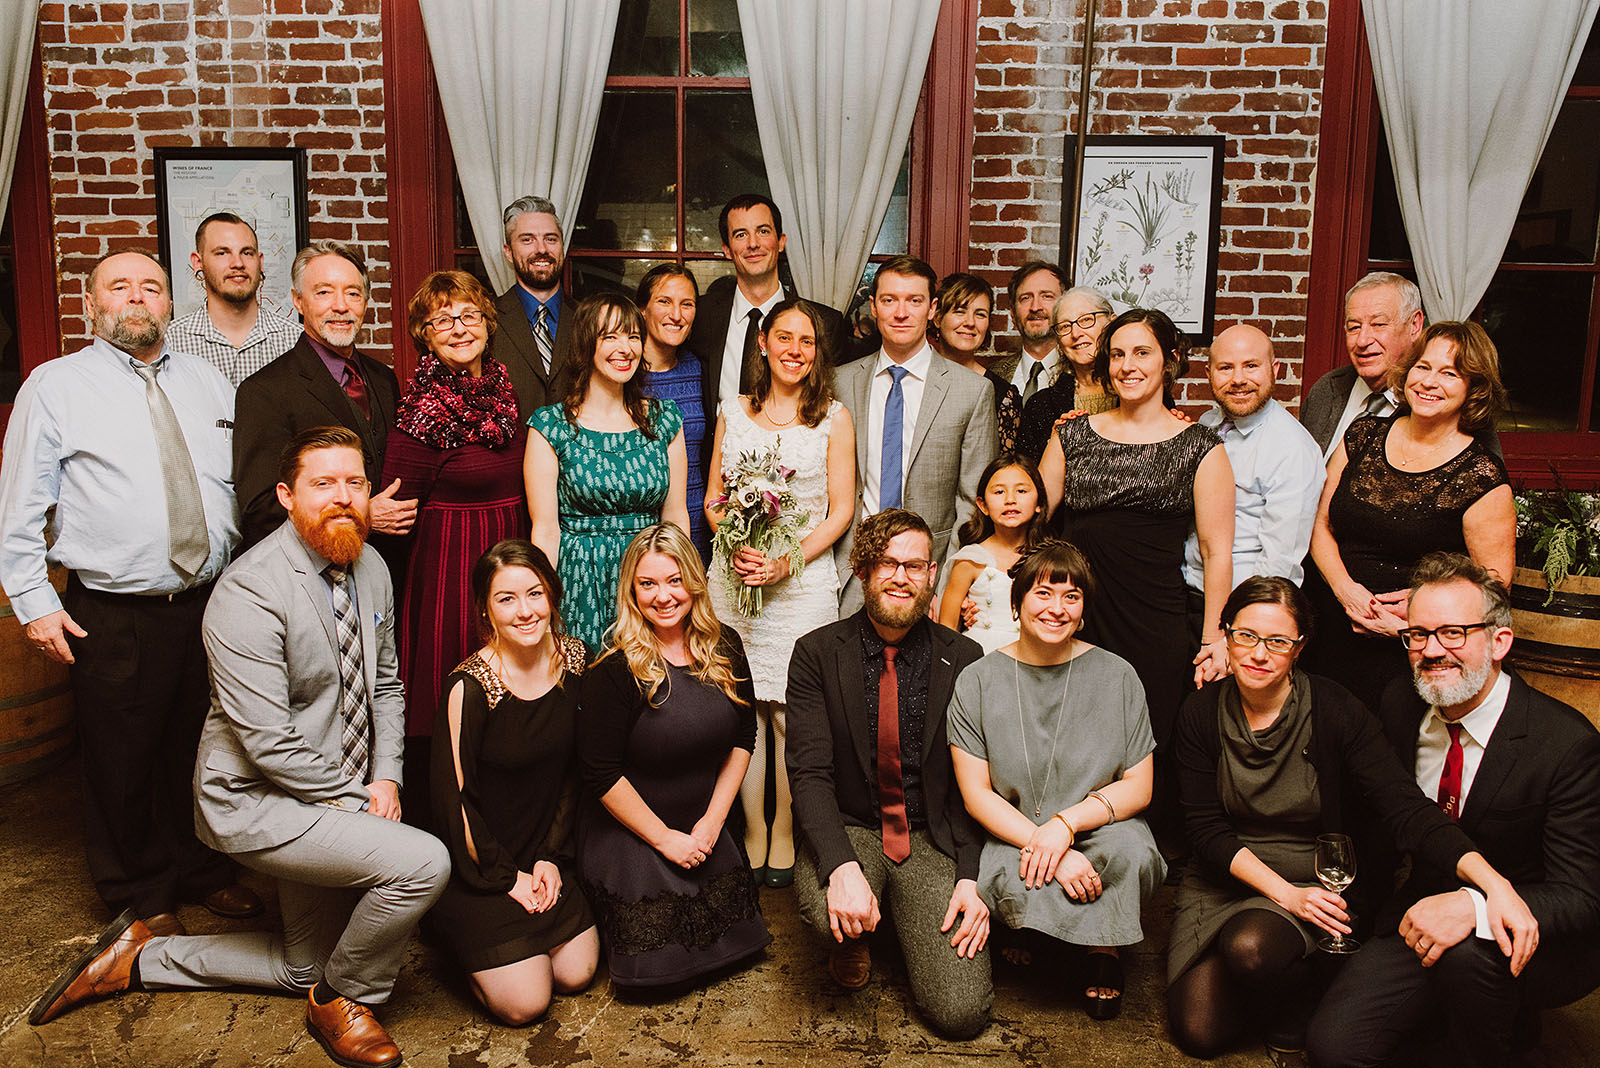 Group shot of all the guests at an Intimate Restaurant Wedding in Portland, OR